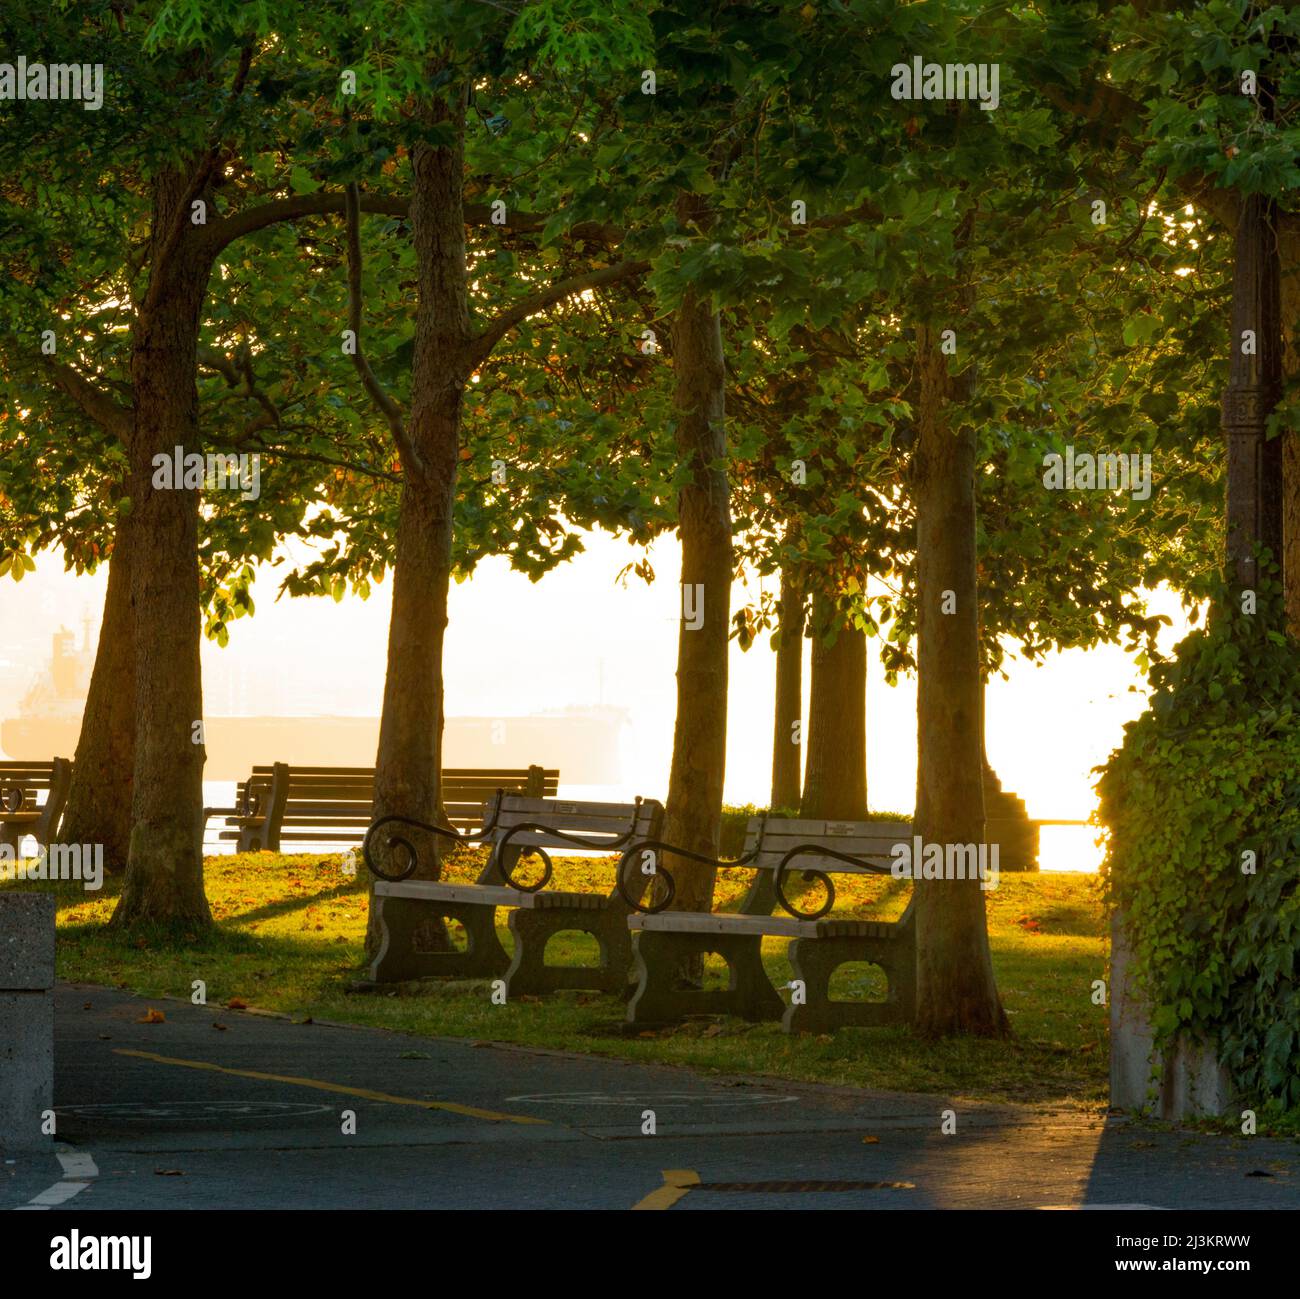 Benches sit under full trees along a trail in a park at sunset; Vancouver, British Columbia, Canada Stock Photo